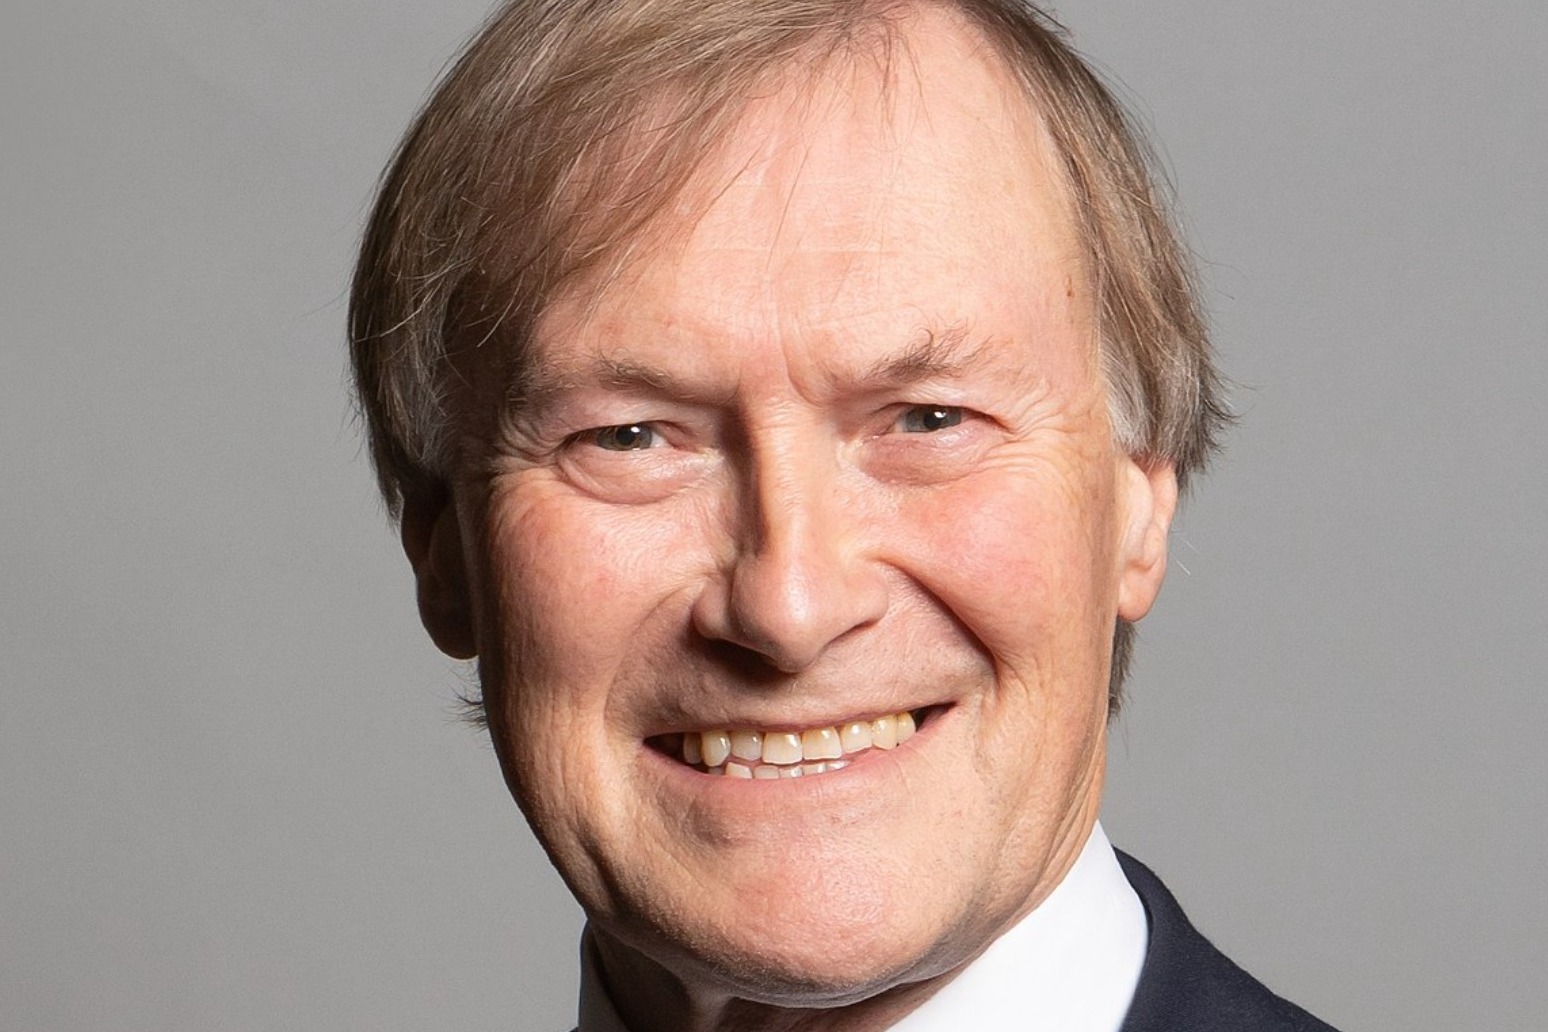 Family ‘absolutely broken’ by murder of Sir David Amess. 